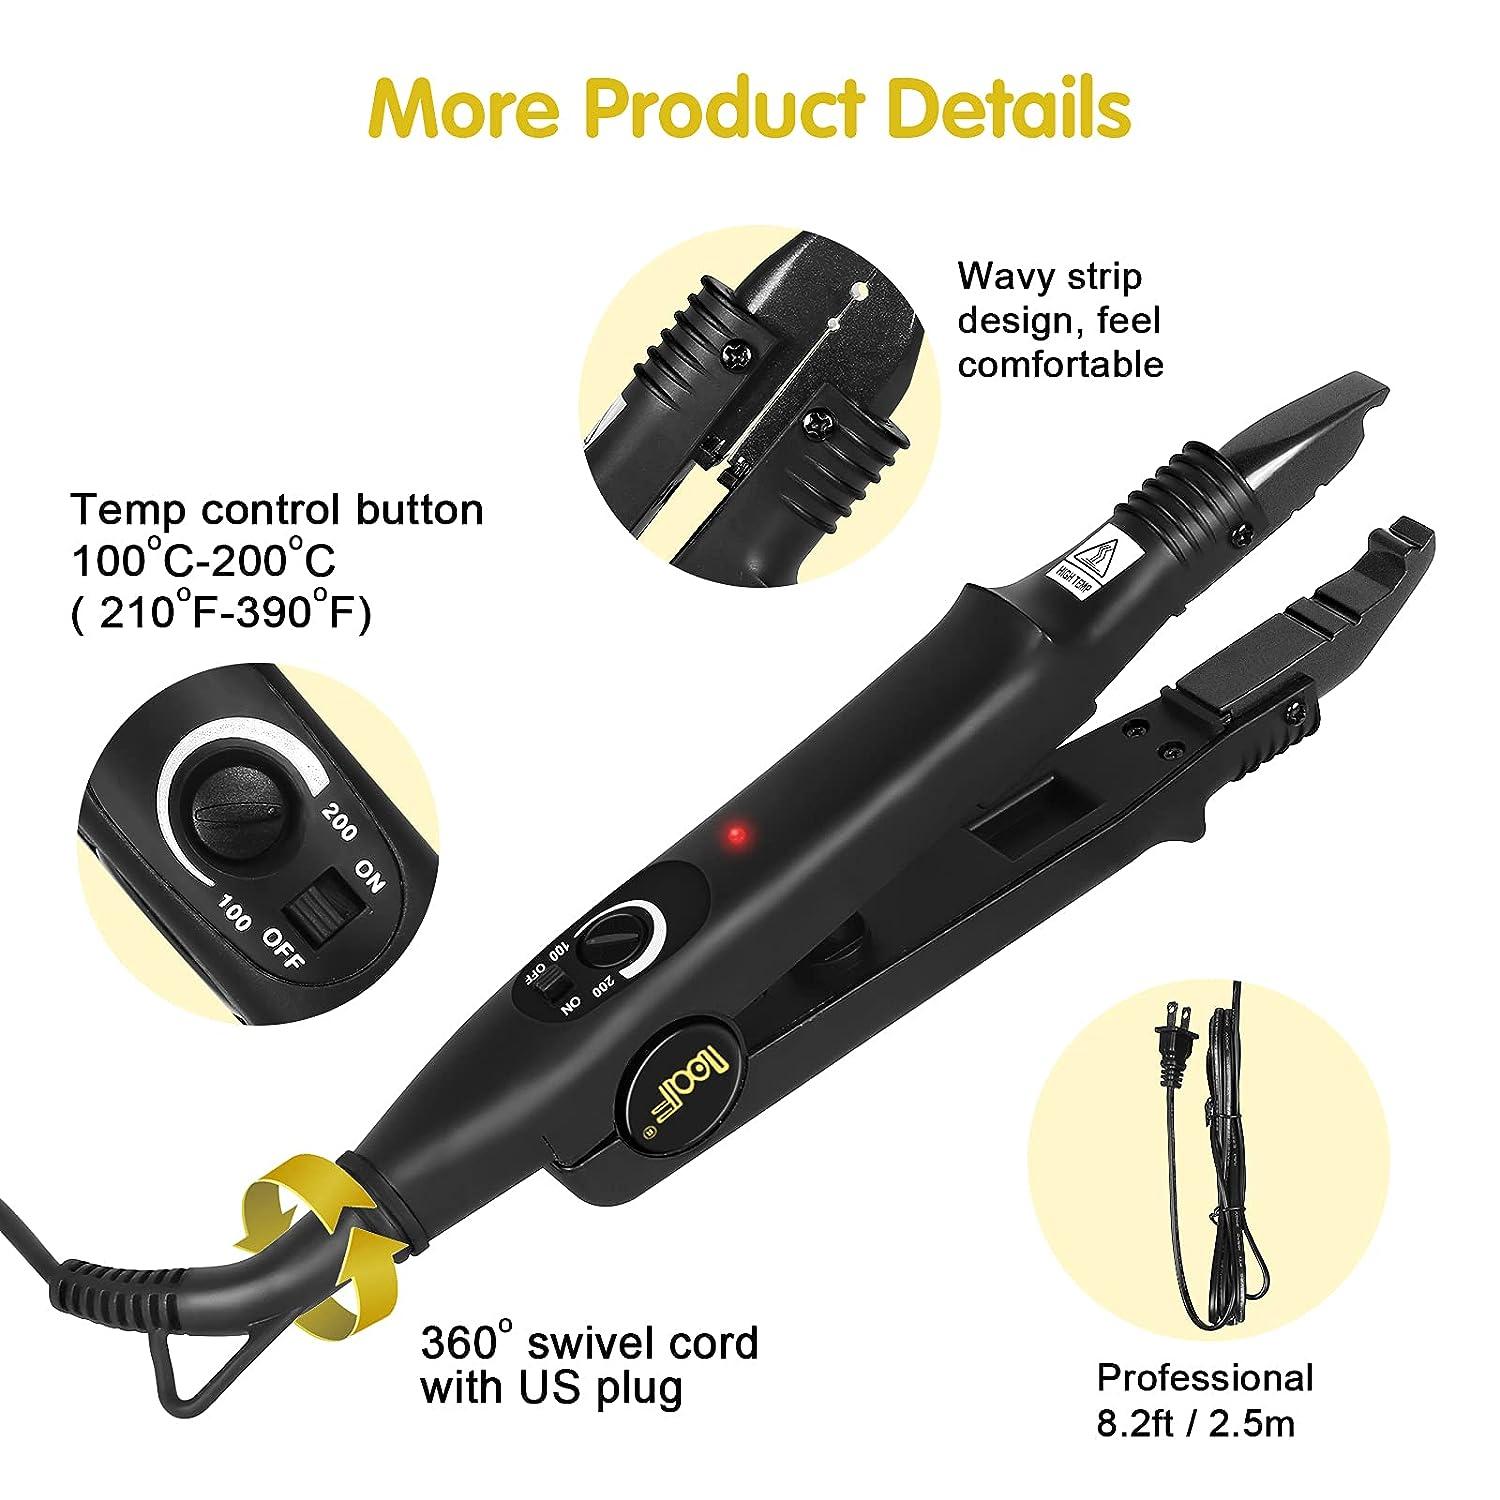 Amesun Professional Hair Extensions Tool Fusion Heat Iron Connector Wand  Melting Tool Set with Spacer Template Clips (Black)